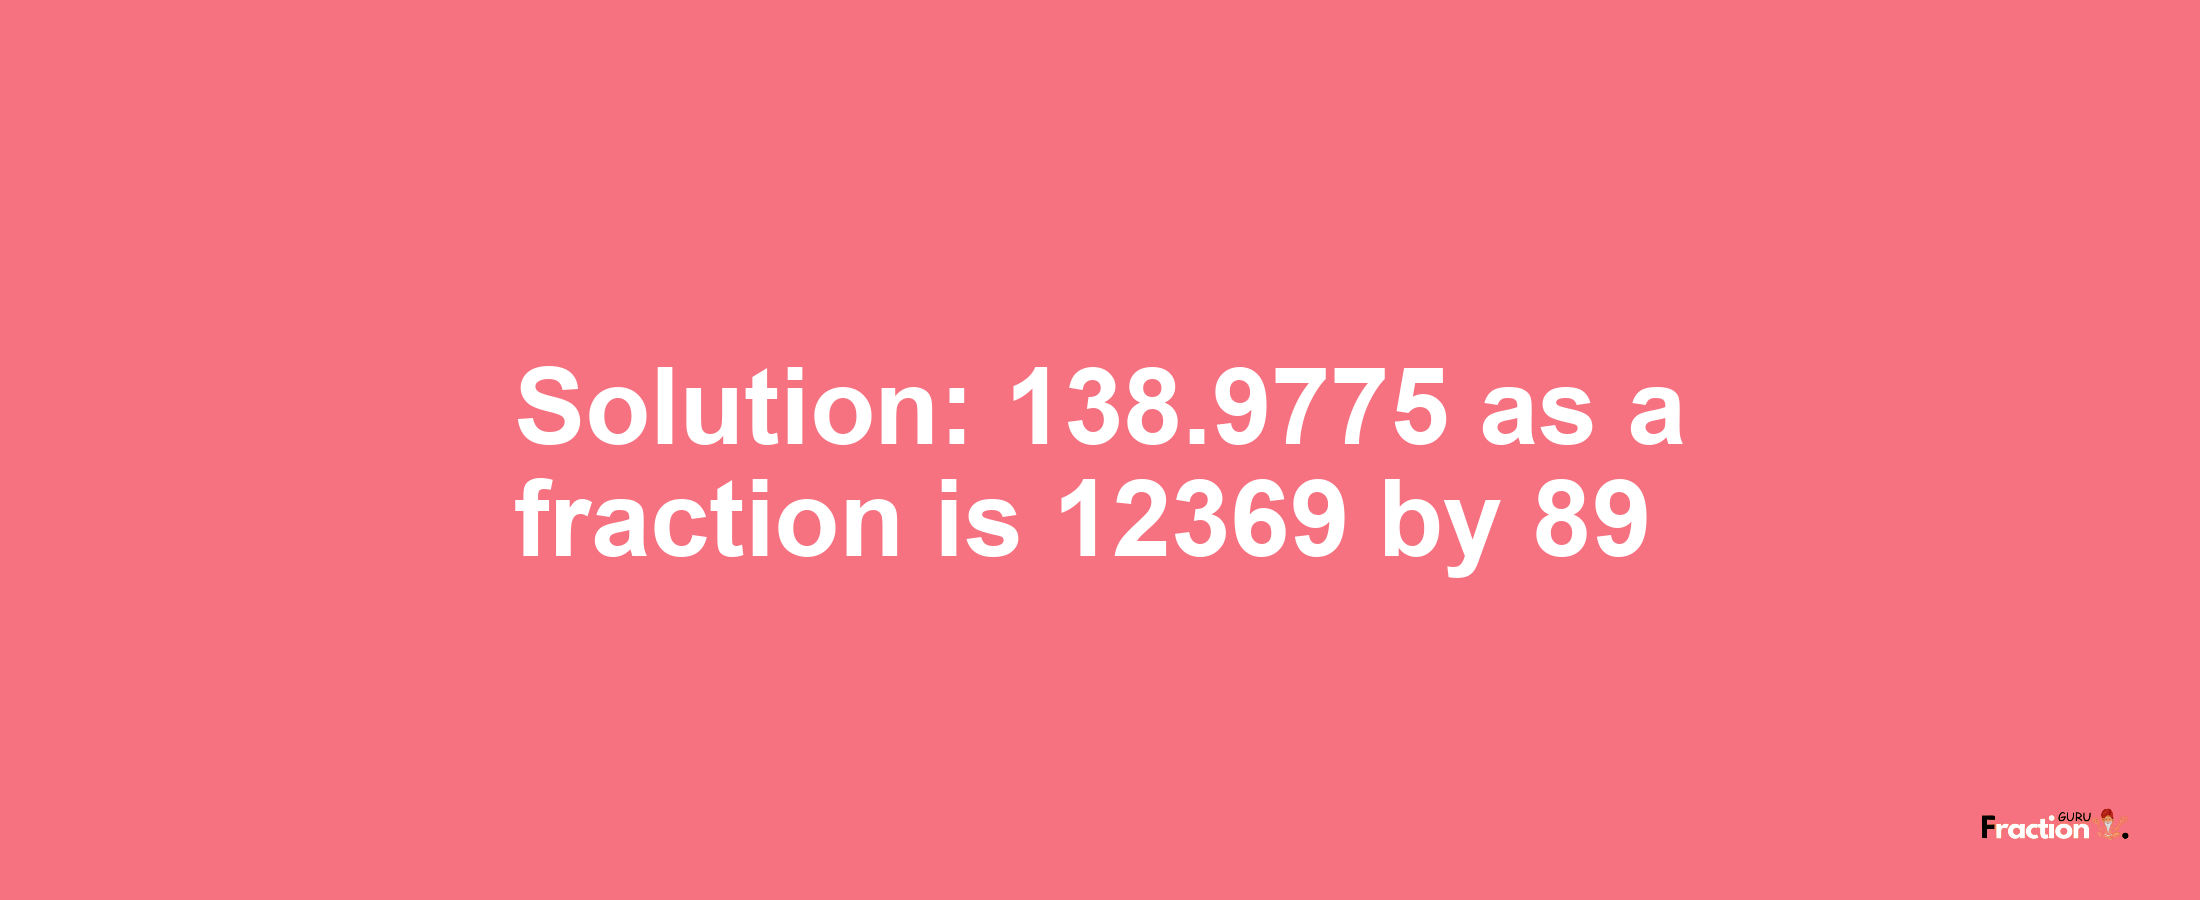 Solution:138.9775 as a fraction is 12369/89